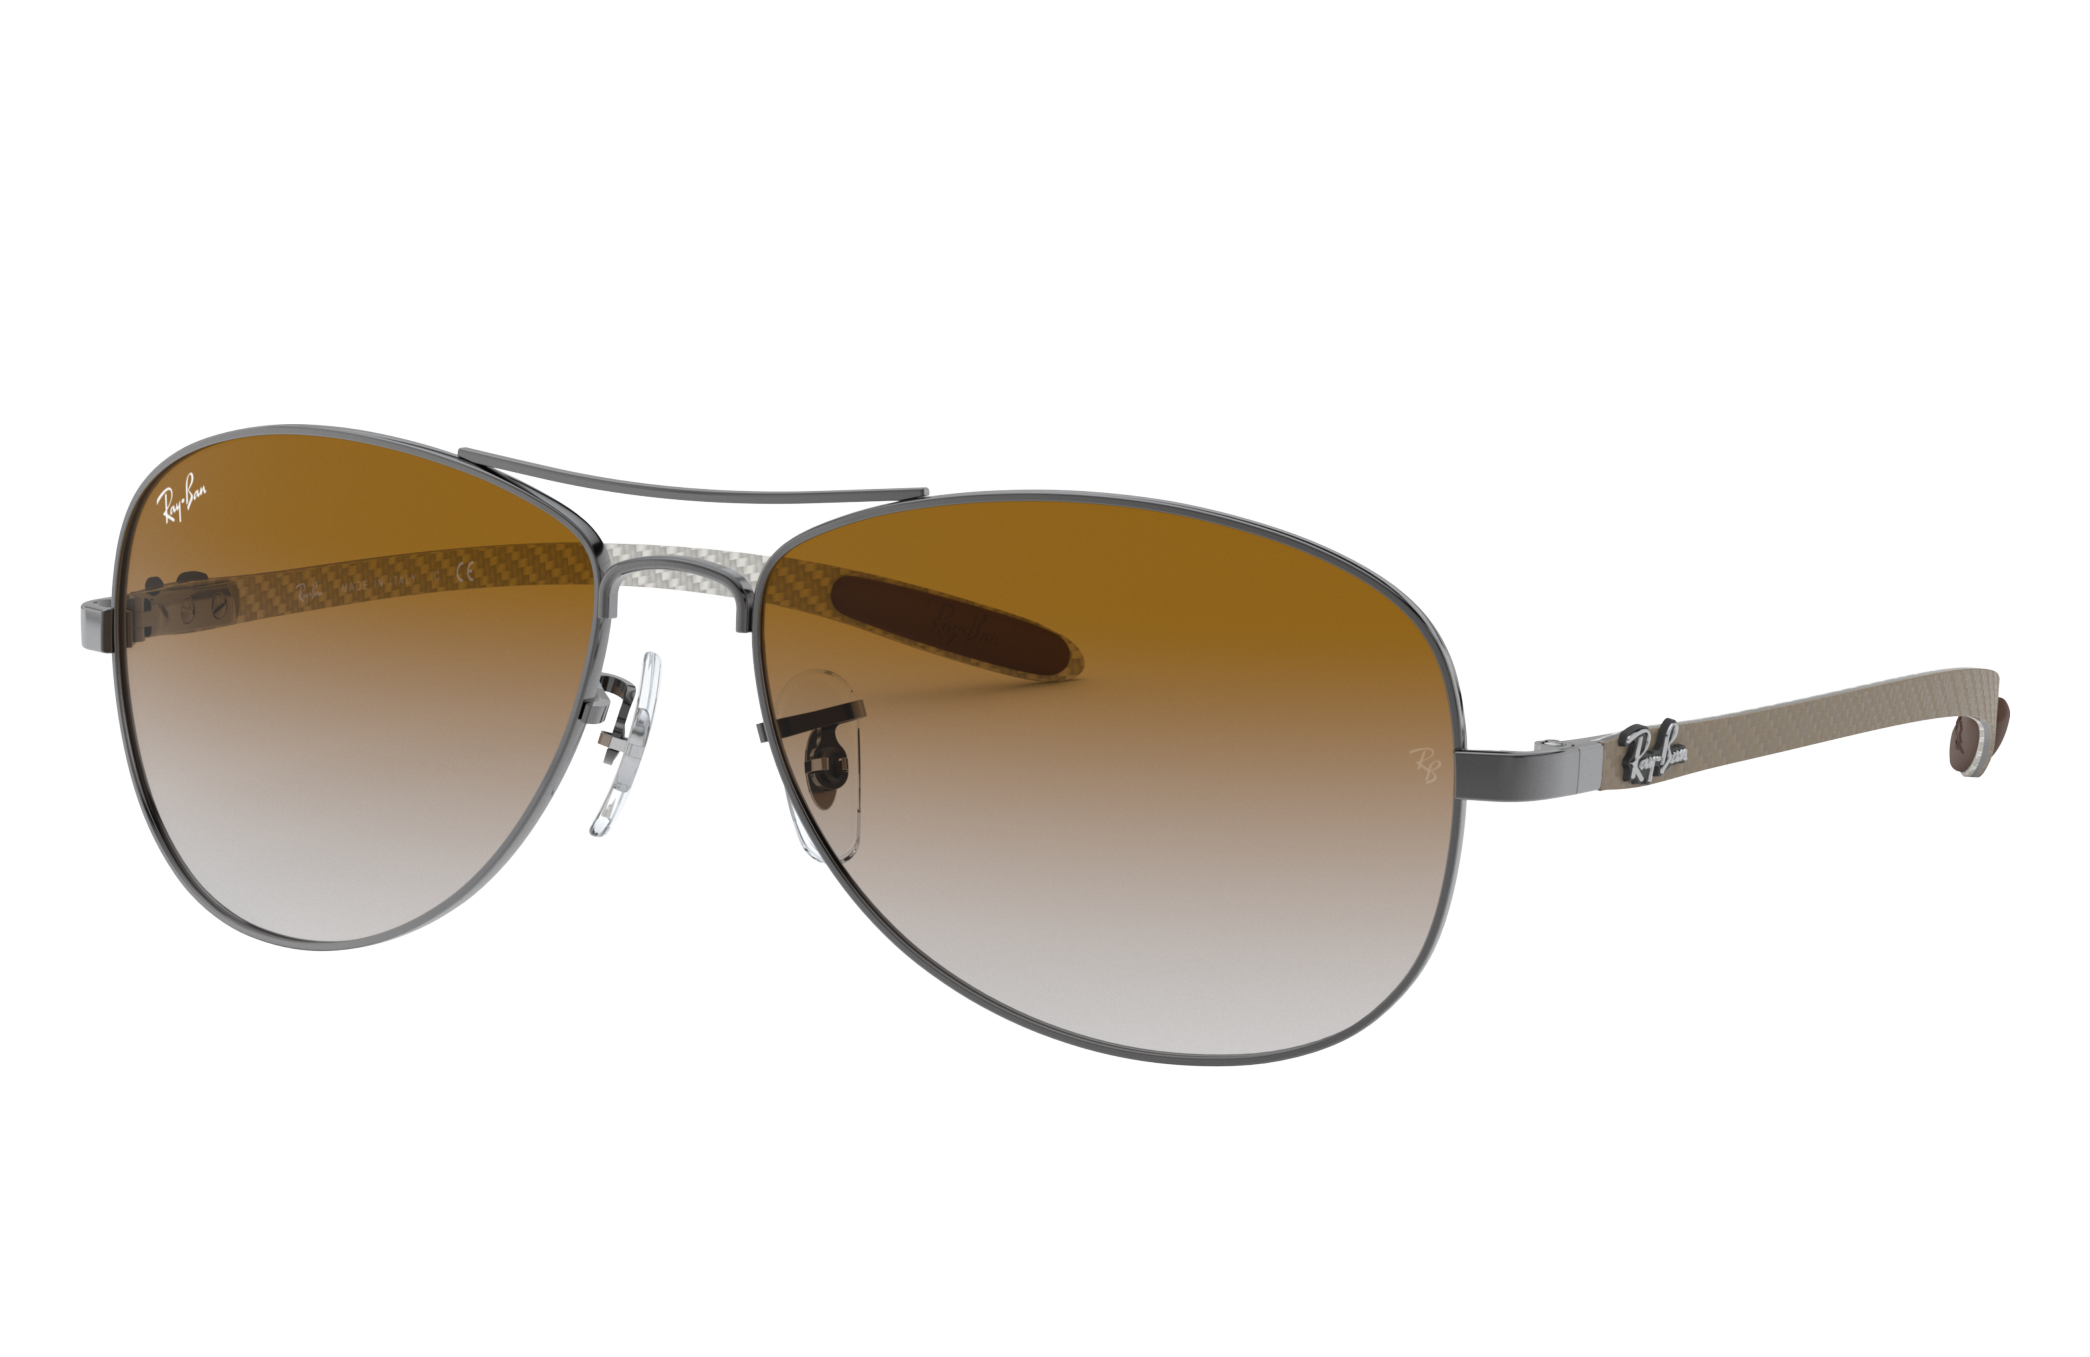 Rb8301 Sunglasses in Gunmetal and Light Brown | Ray-Ban®